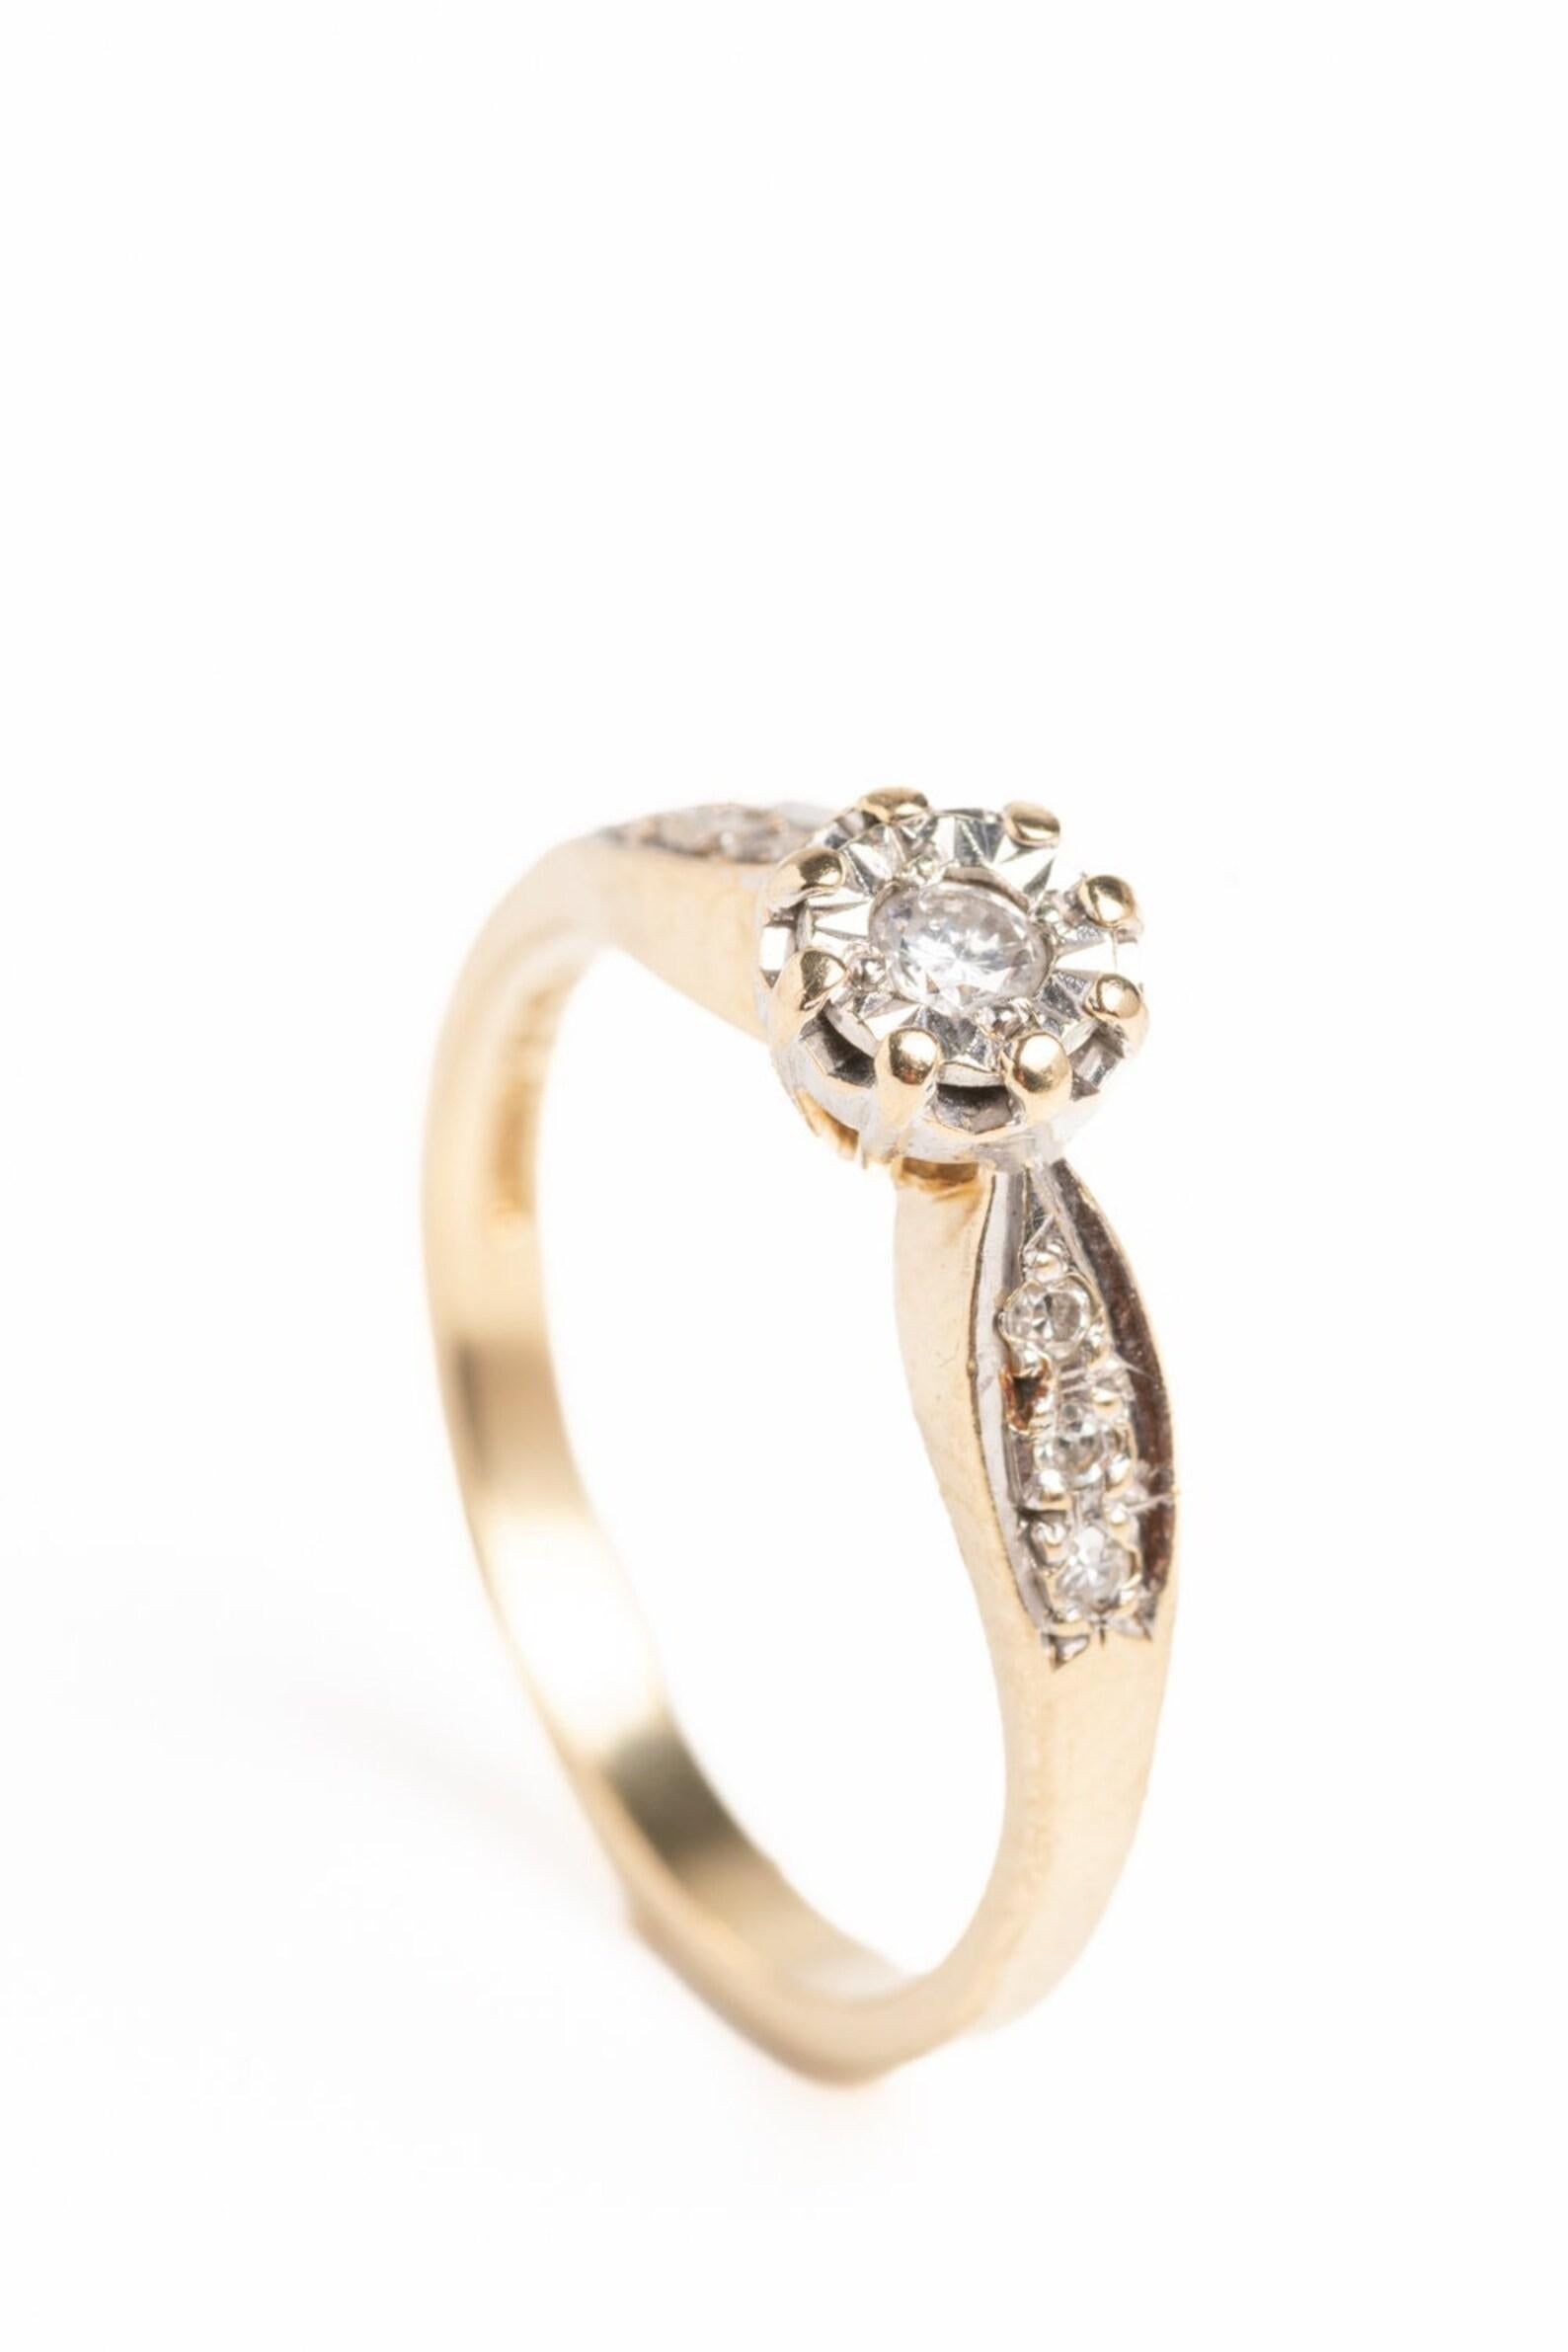 Vintage 9ct Gold Diamond Ring In Good Condition For Sale In Portland, England